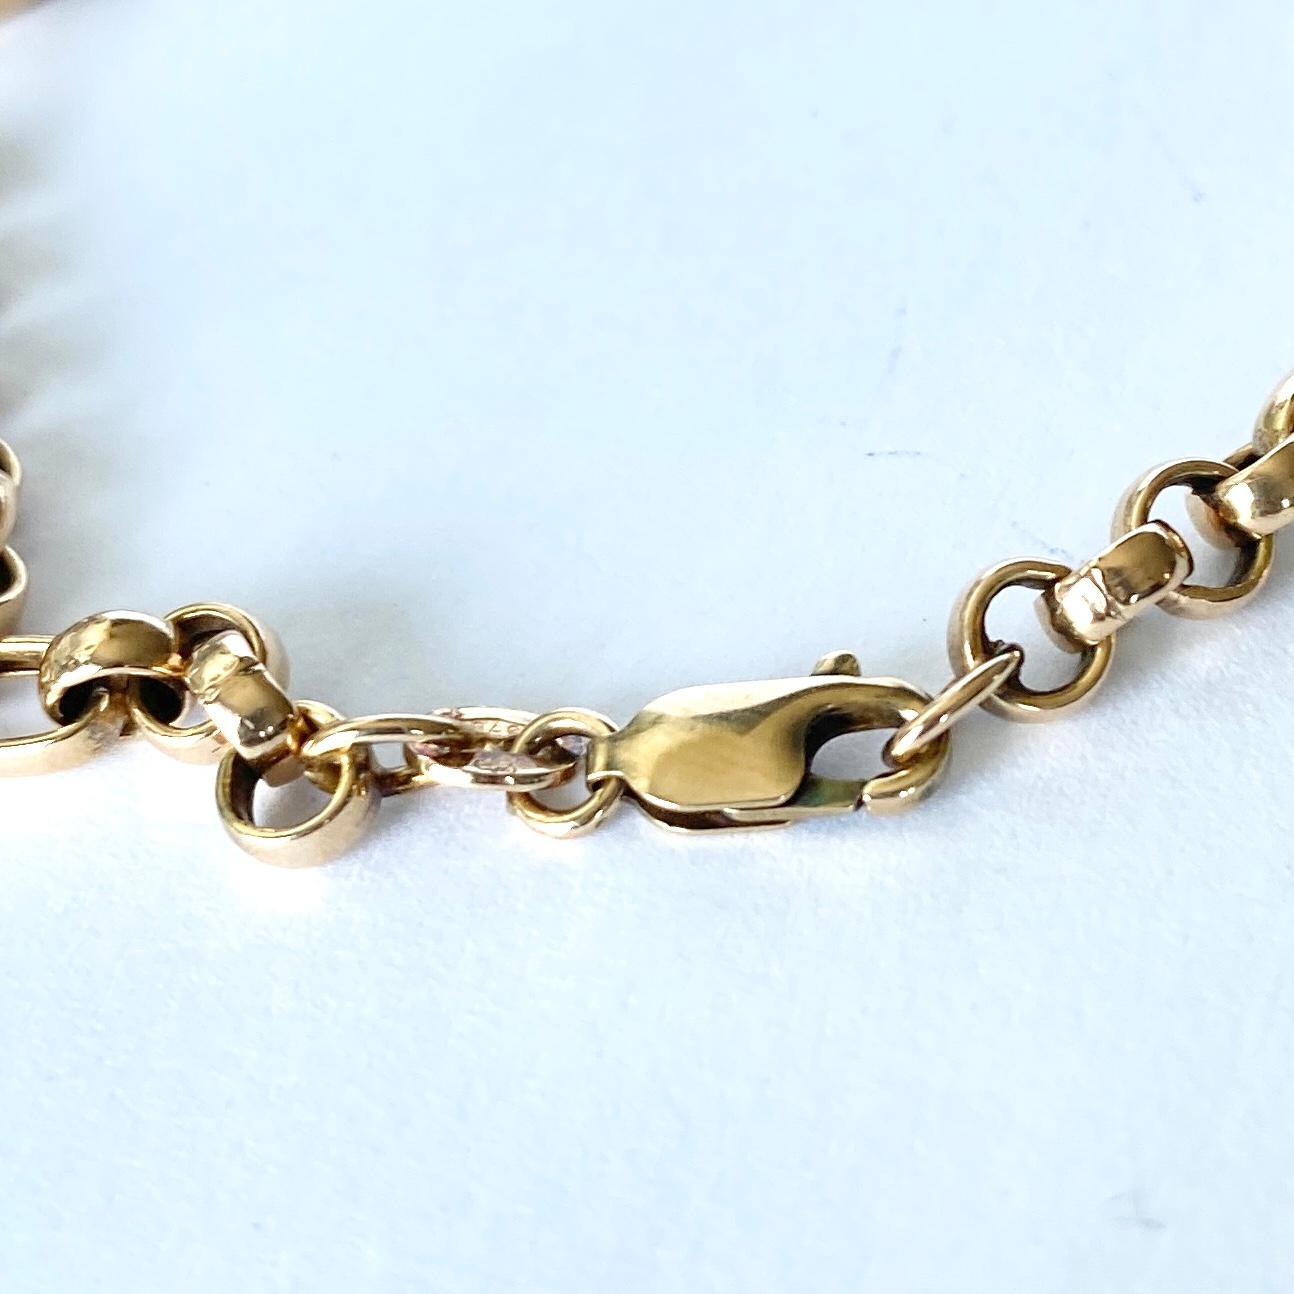 This 9carat gold has belcher chain and trombone links. The necklace is fastened with a simple clasp and loop. 

Length: 46cm
Width: 4mm

Weight: 10g